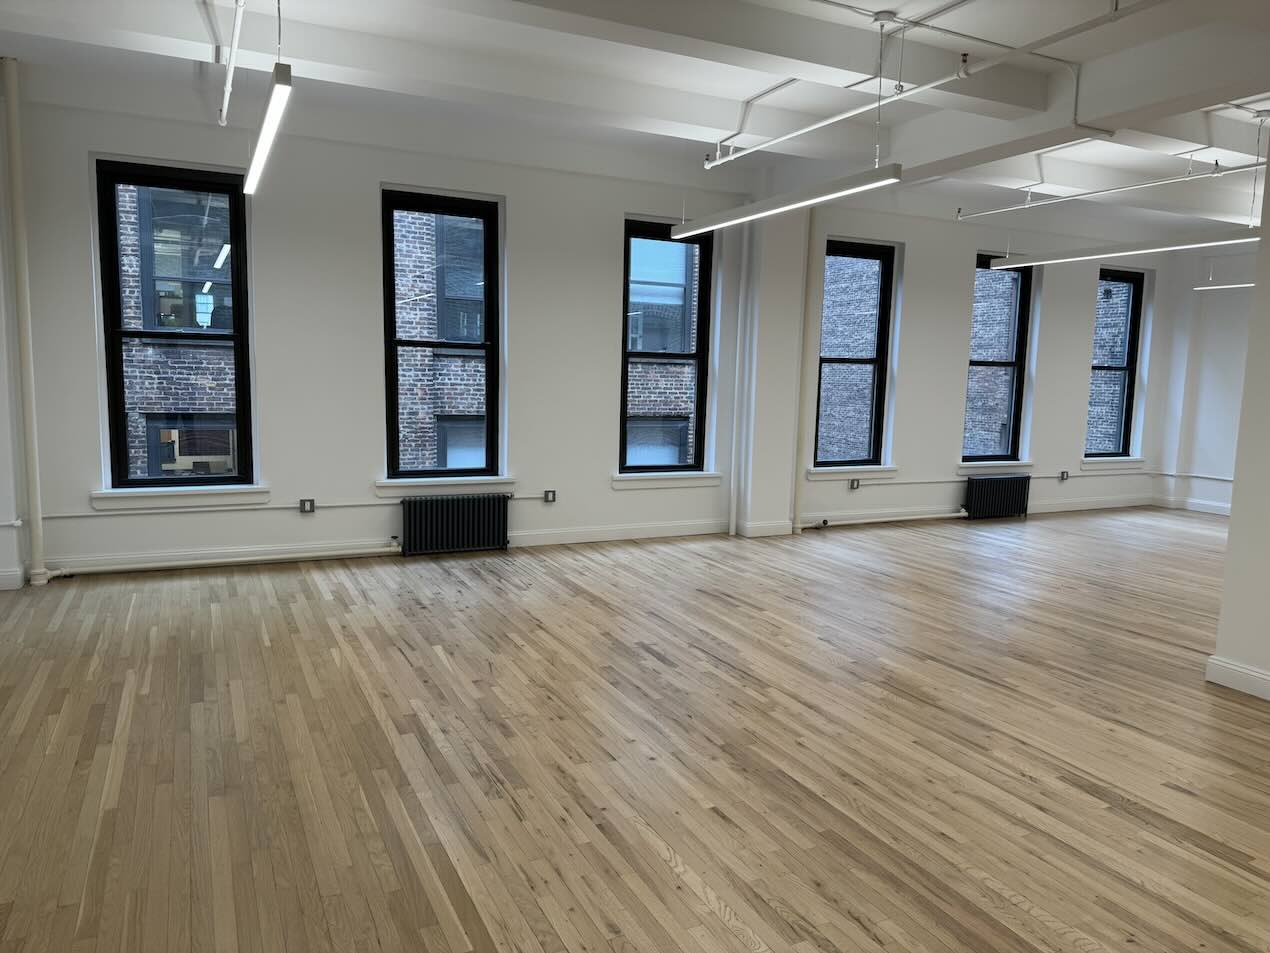 Open Plan Loft Office Space for Lease at 37 West 20th Street, in the heart of Chelsea, Manhattan.